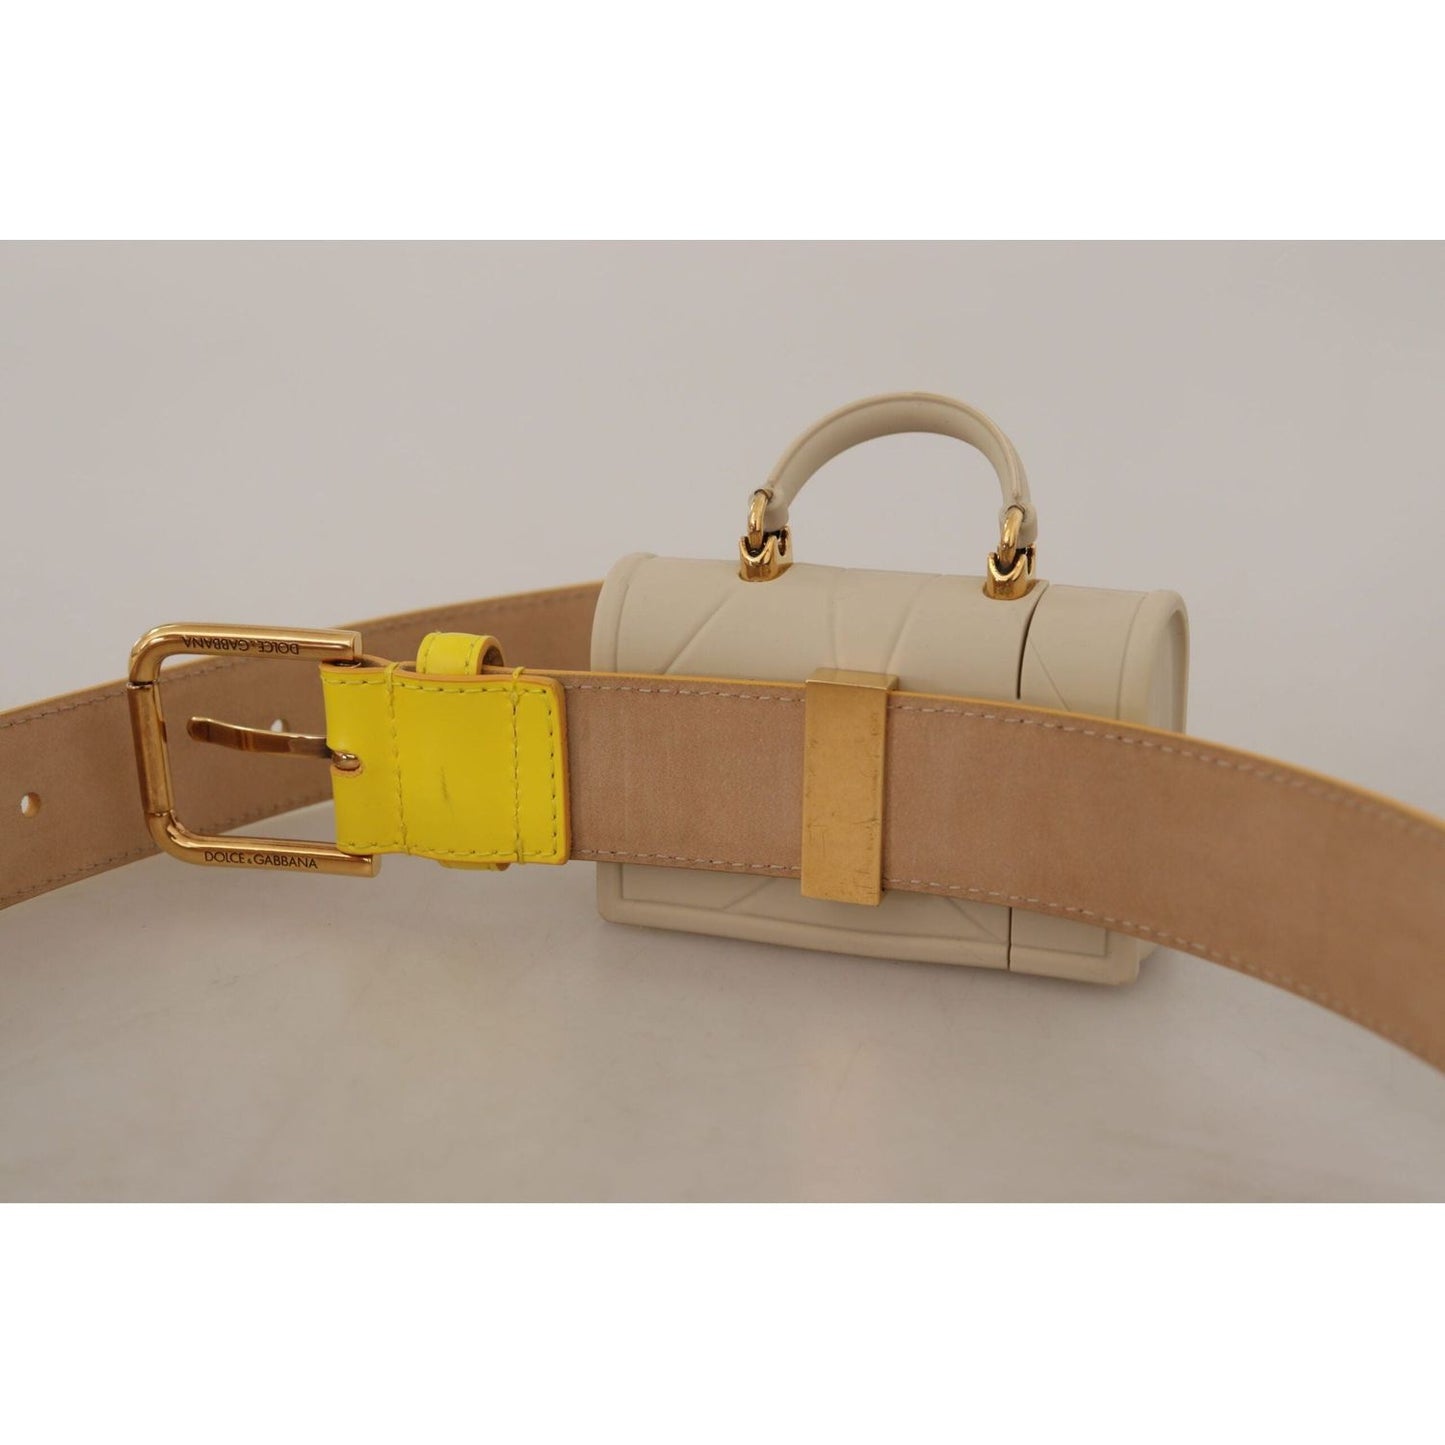 Dolce & Gabbana Chic Yellow Leather Belt with Headphone Case yellow-leather-devotion-heart-micro-bag-headphones-belt